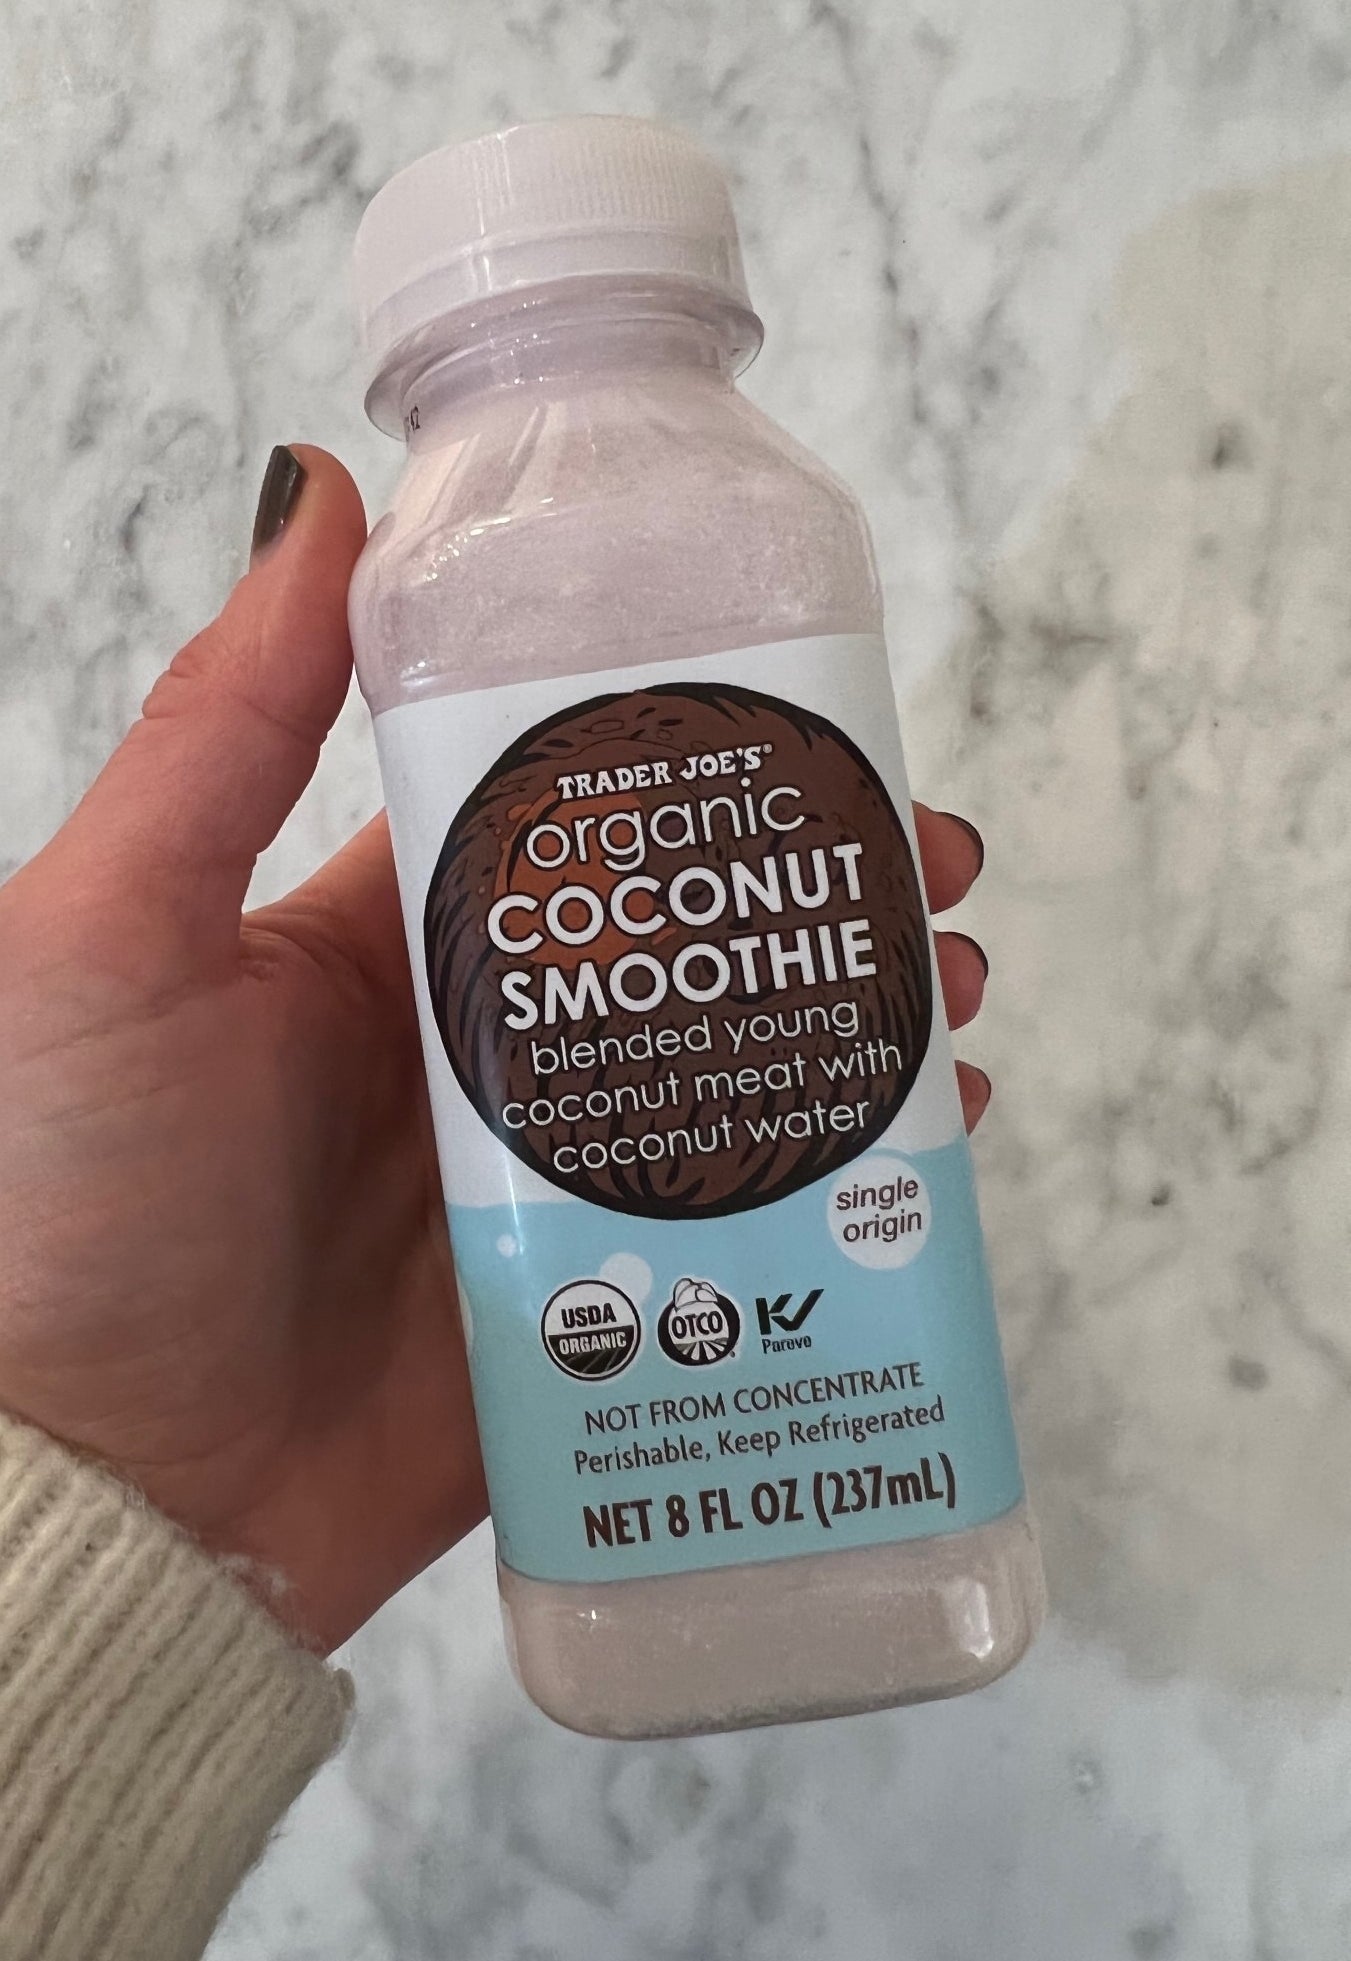 An organic coconut smoothie.